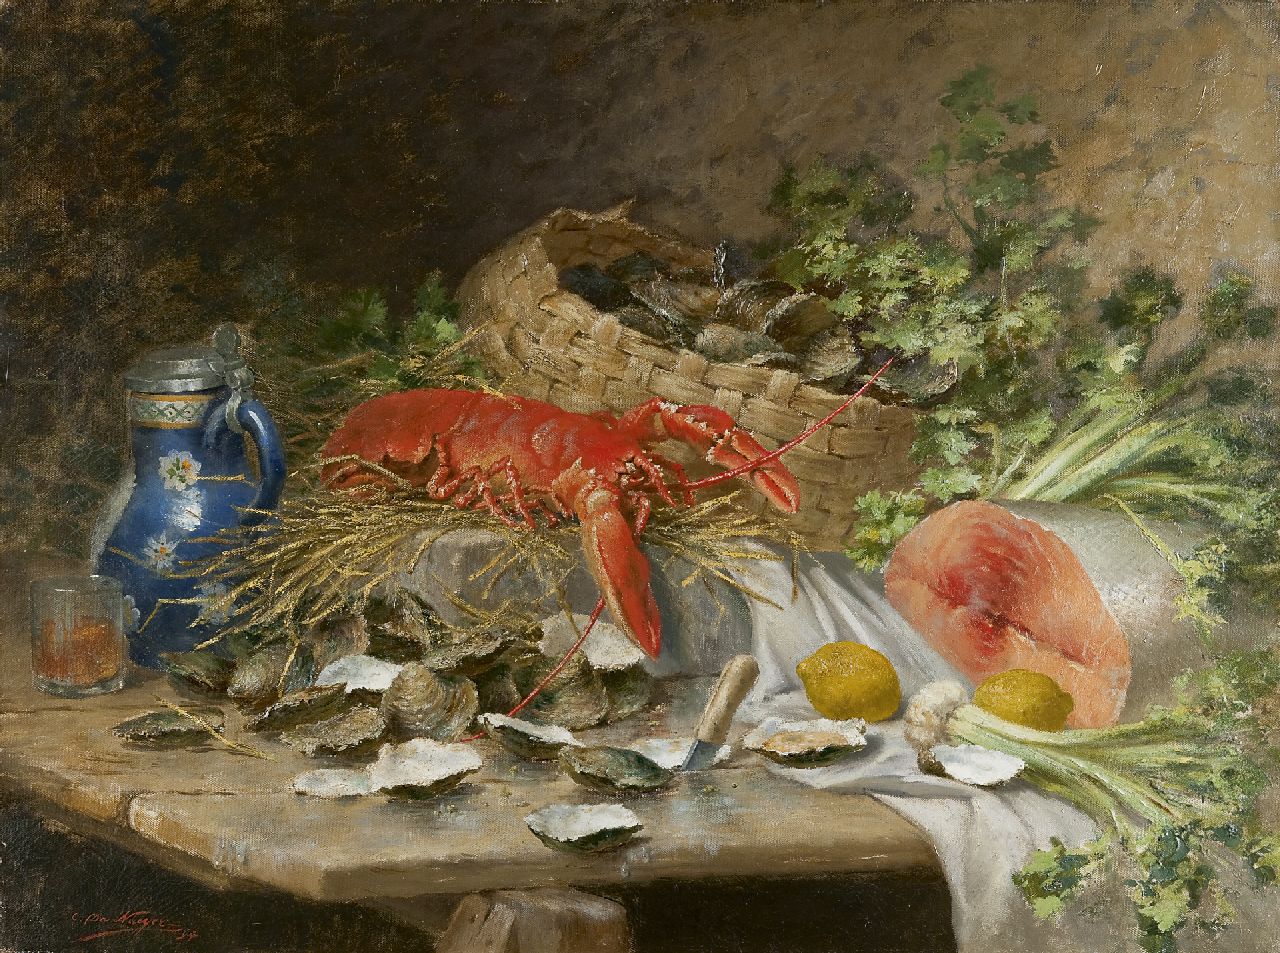 Naeyer C. de | Charles de Naeyer, A still life of a lobster, a salmon and oysters, Öl auf Leinwand 75,4 x 100,6 cm, signed l.l. und dated '94